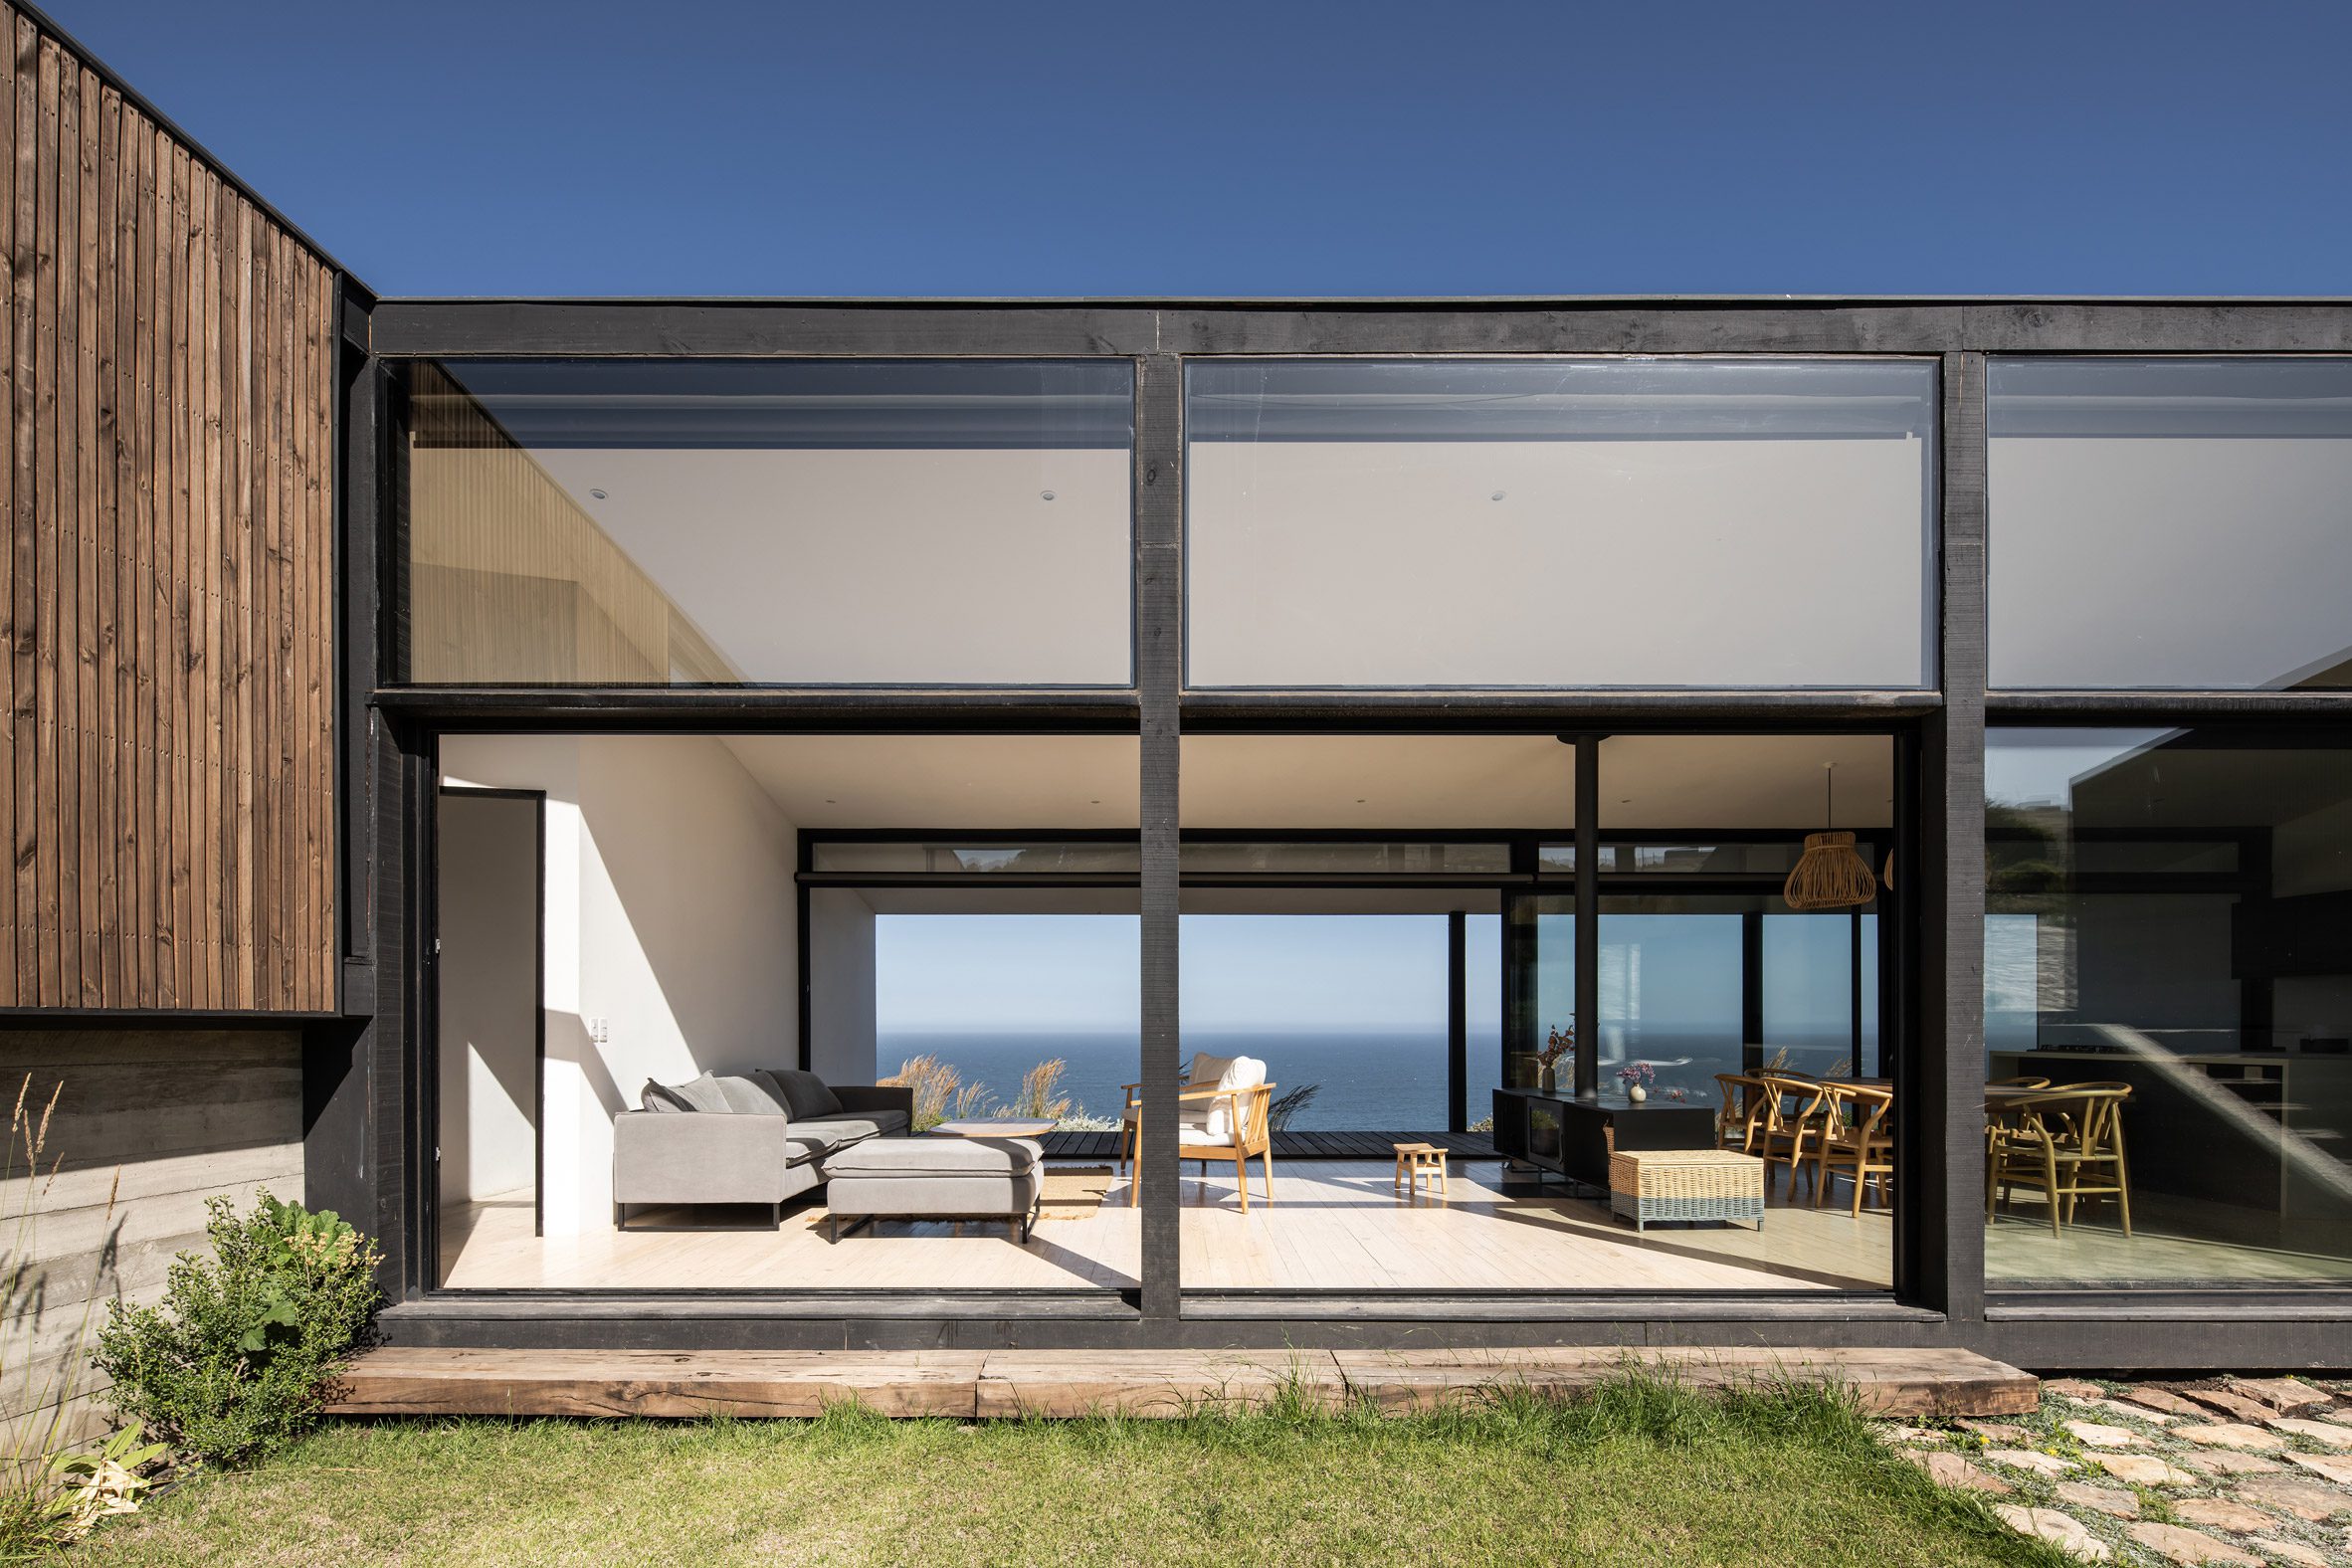 Outdoor garden of an open-plan home with large glass sliding doors overlooking the sea